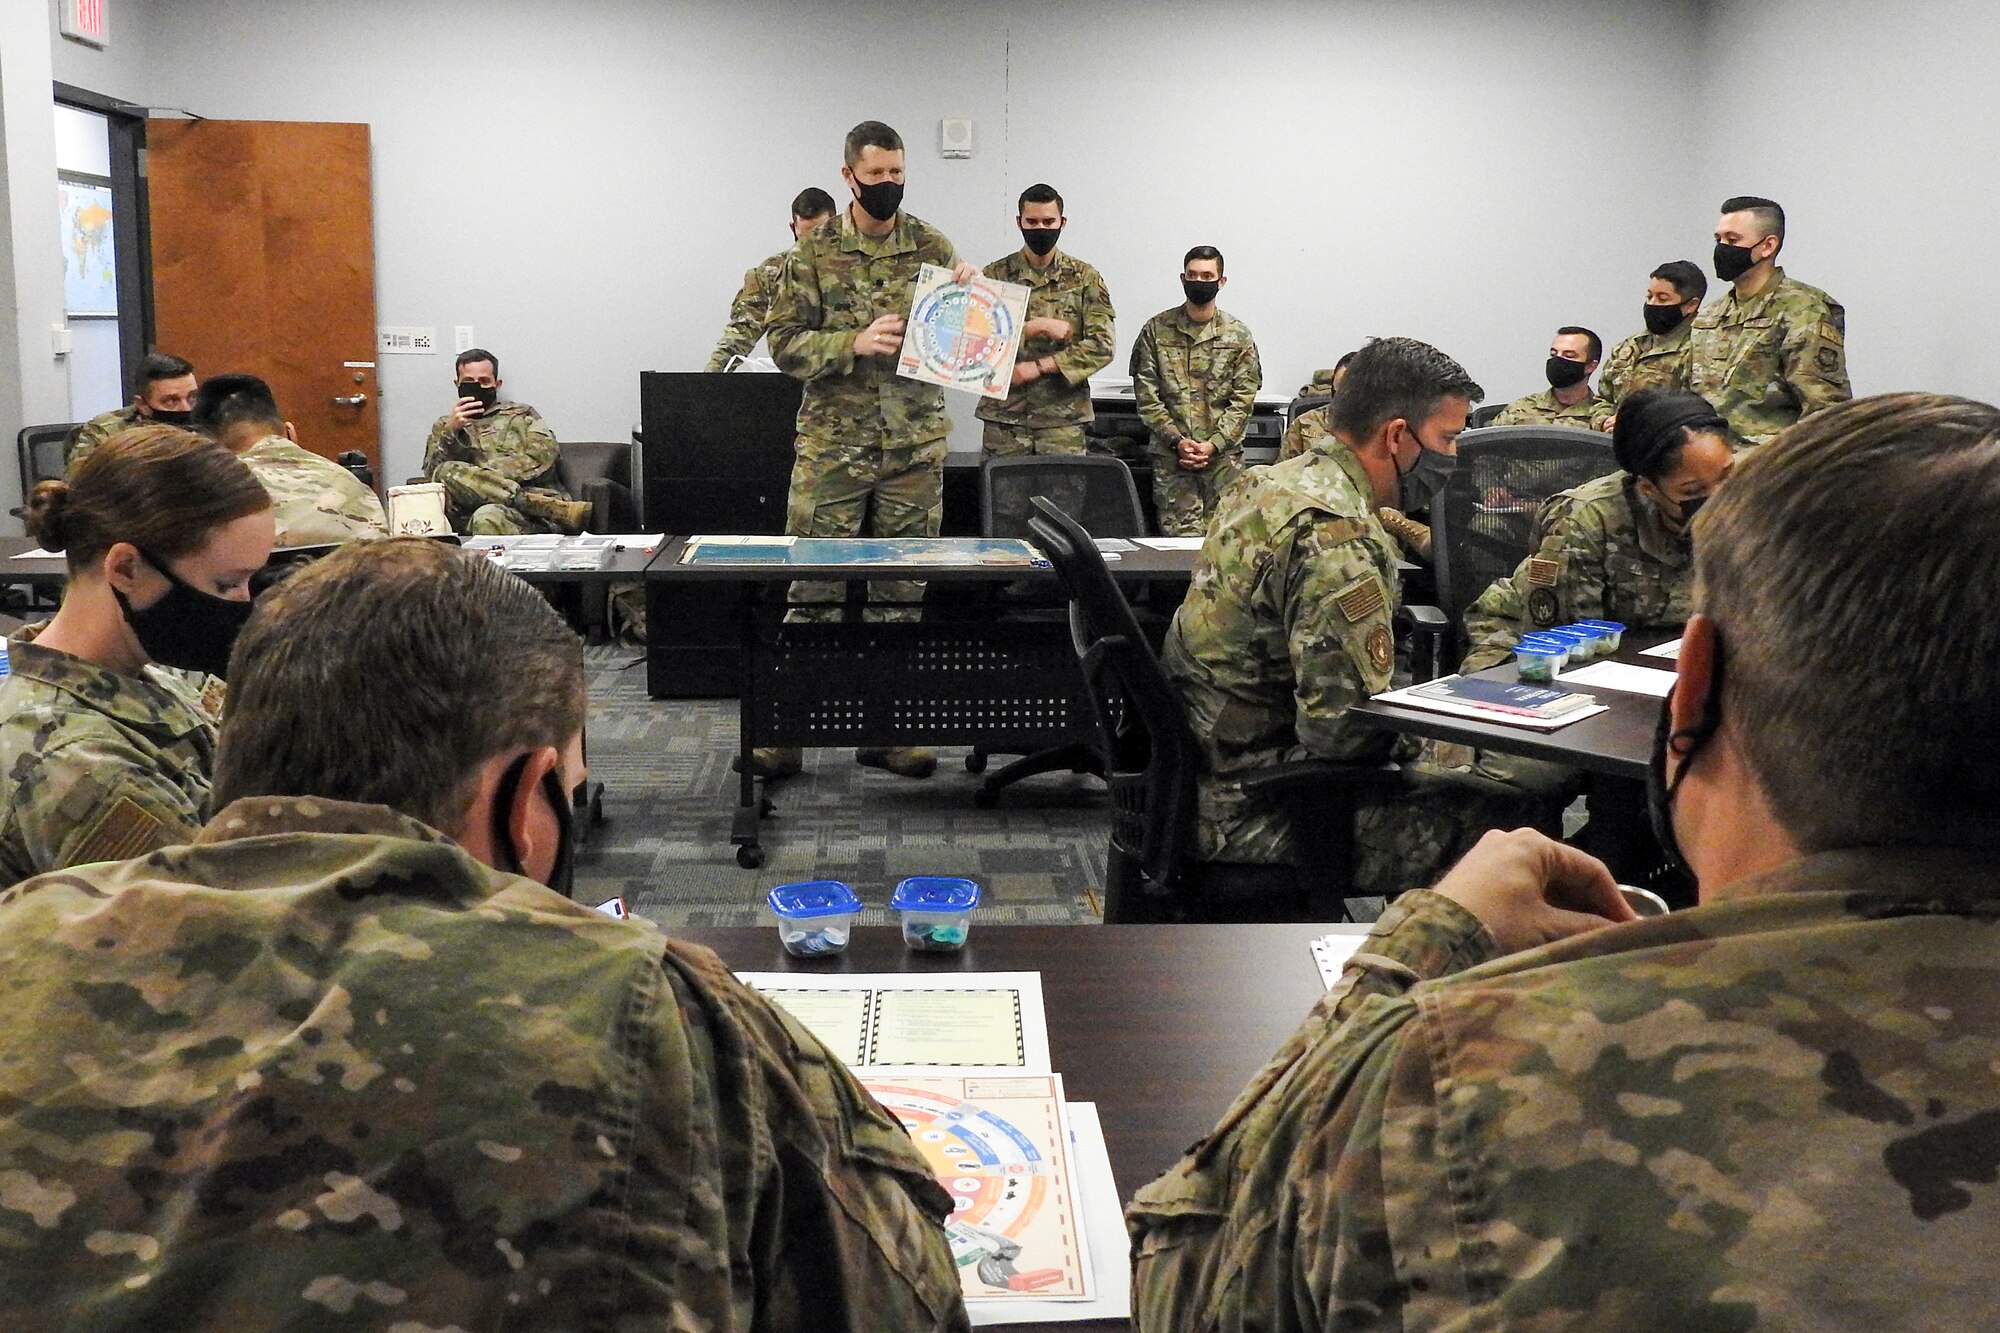 Twenty-five Airmen from various units within the 621st Contingency Response Wing listen to instructions on how to play a prototype board game called “Kingfish ACE” March 26, 2021, at Travis Air Force Base, California. U.S. Air Force Lt. Col. Troy Pierce, while attending the Marine Corps War College, created the game as part of his final project at the college. (U.S. Air Force photo by Senior Airman Chad Kotce)